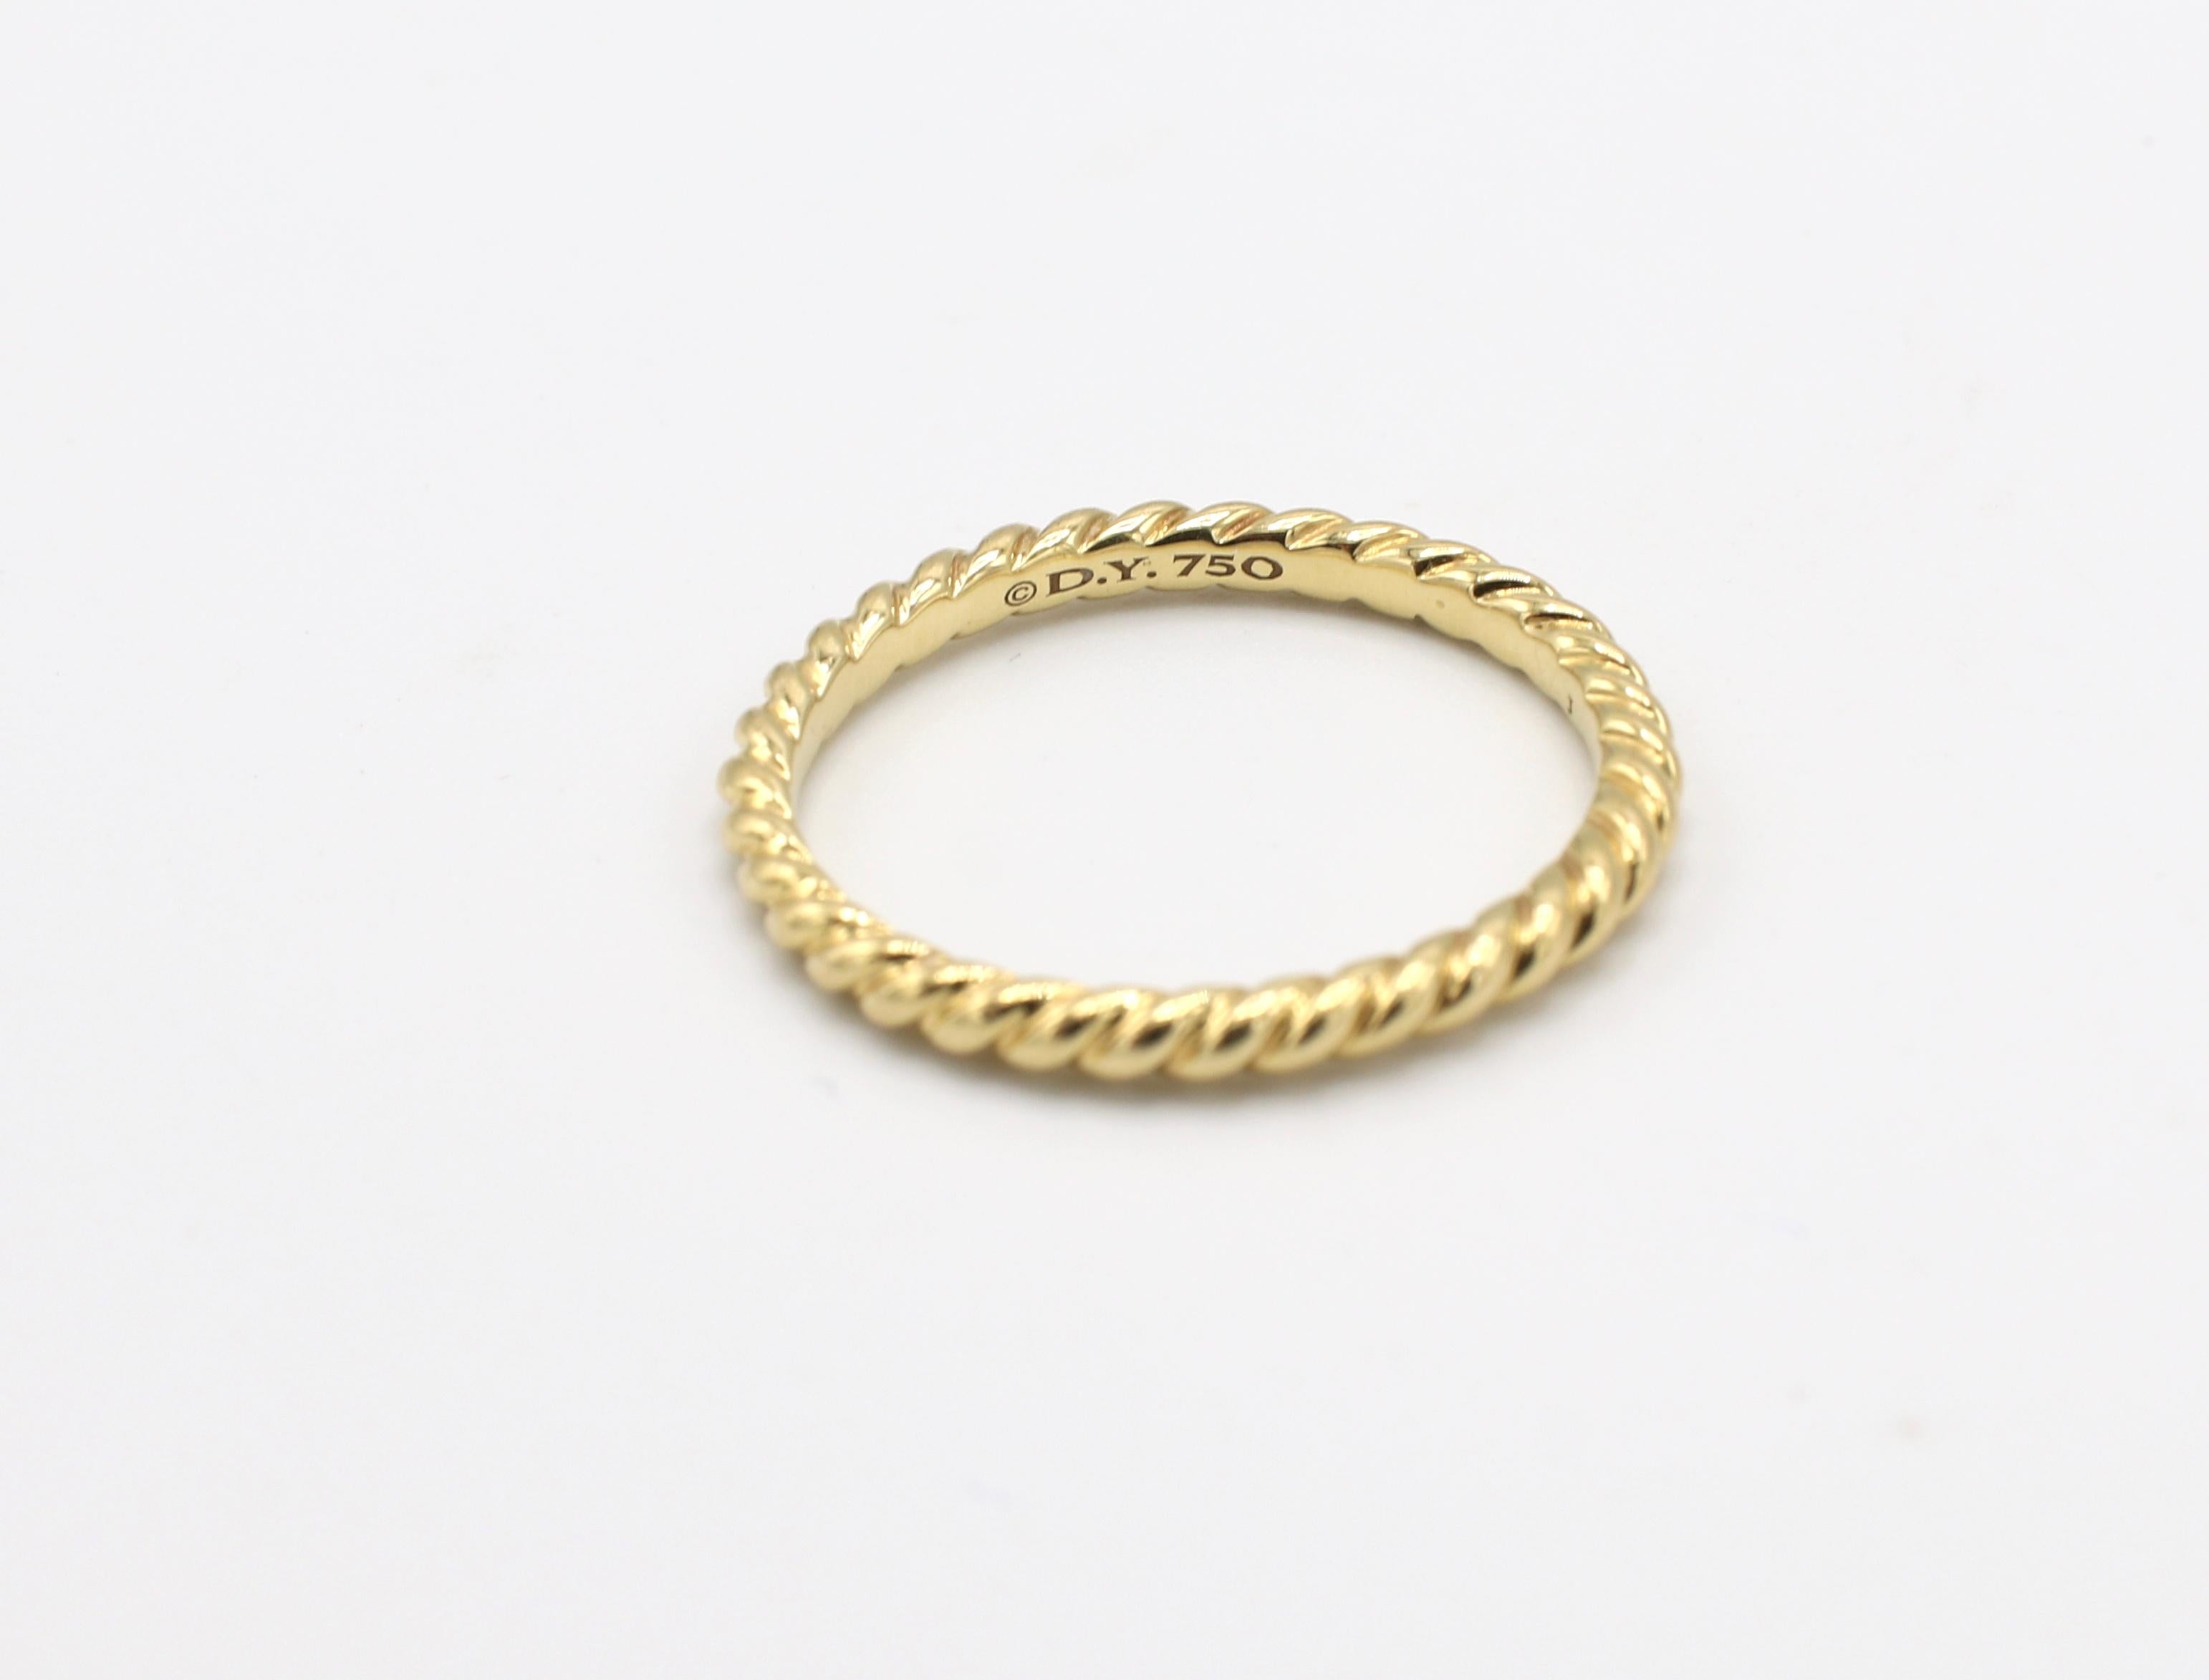 David Yurman Unity Cable Wedding Band Ring in 18K Gold, 2mm

Metal: 18k yellow gold
Weight: 2.40 grams 
Band is 2mm wide
Signed: D.Y. 750
Size: 7.75 (US)
Retail: $595 USD 